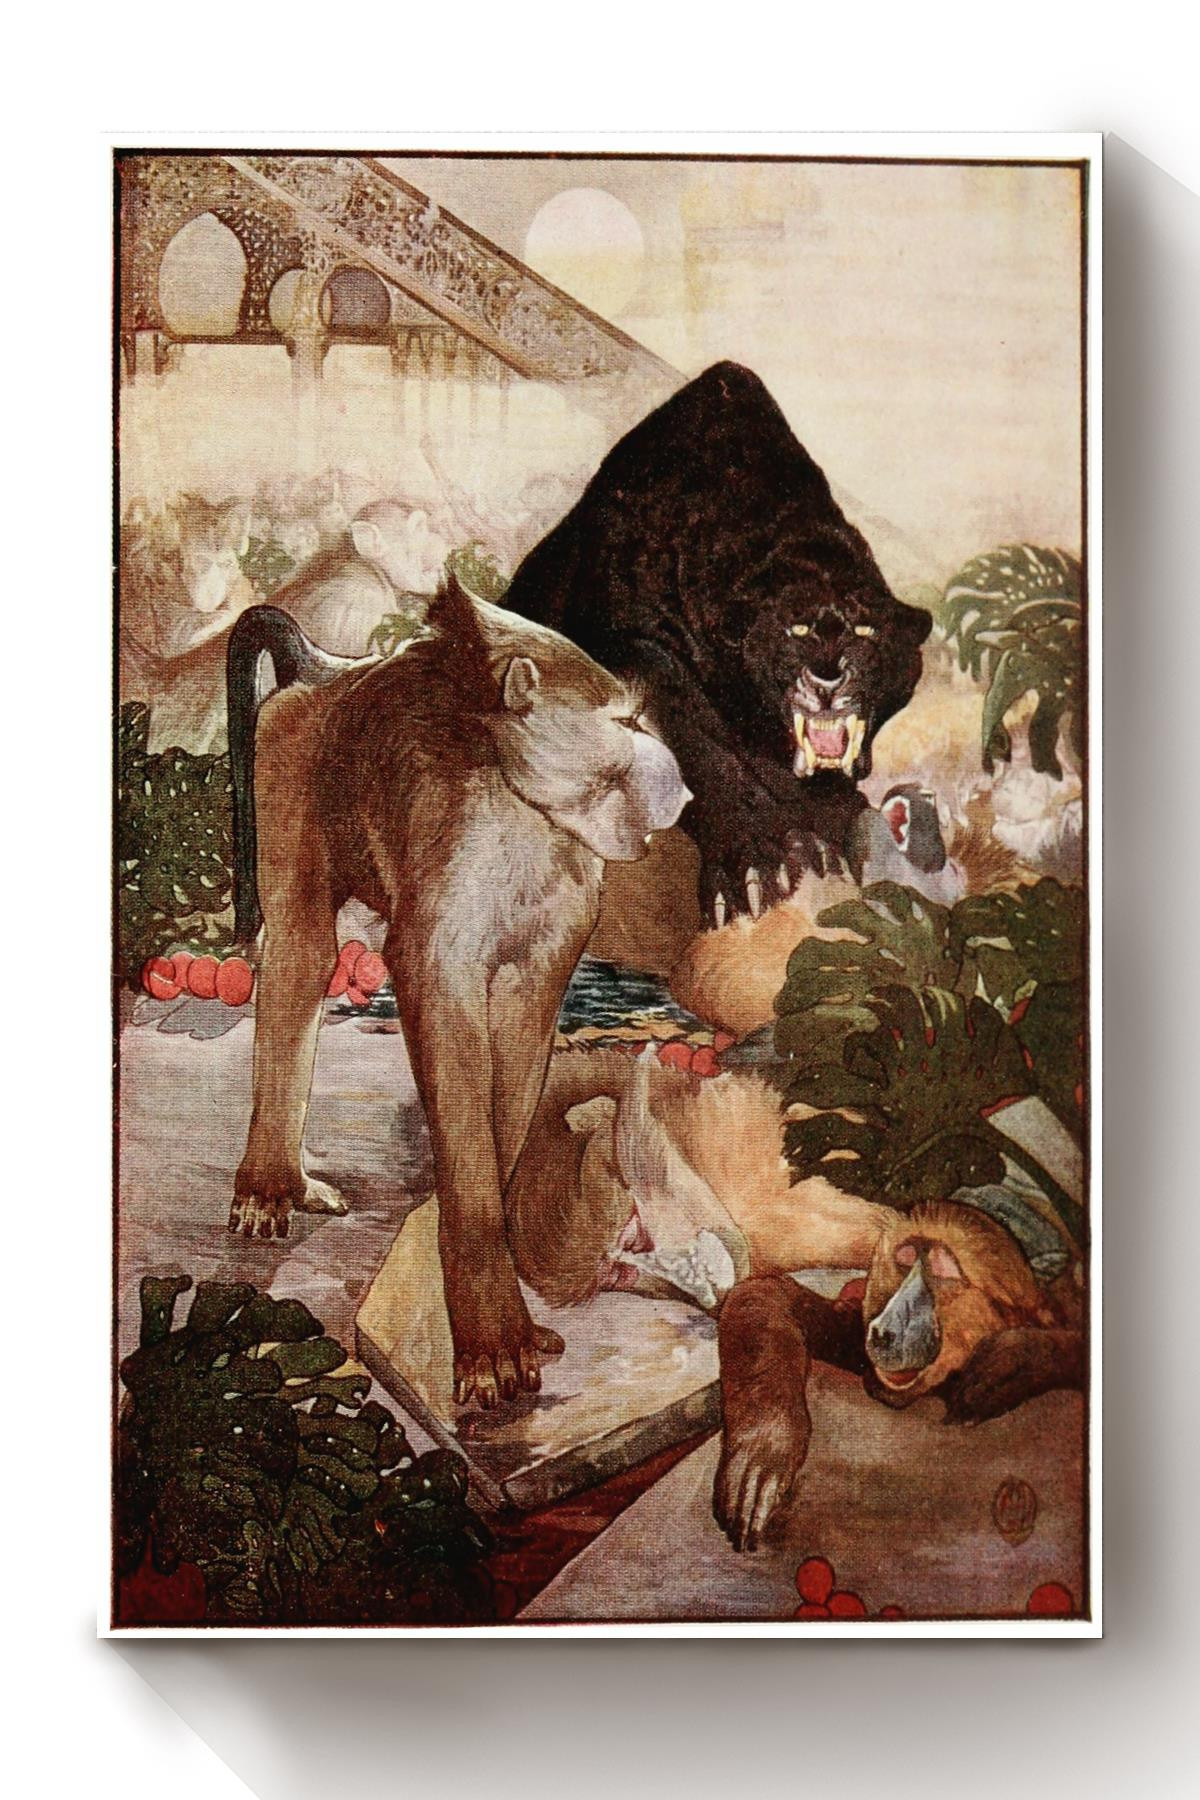 The Jungle Book Fairy Tales The Monkey Fight Illustrations By Edward Detmold Canvas Wrapped Canvas 8x10